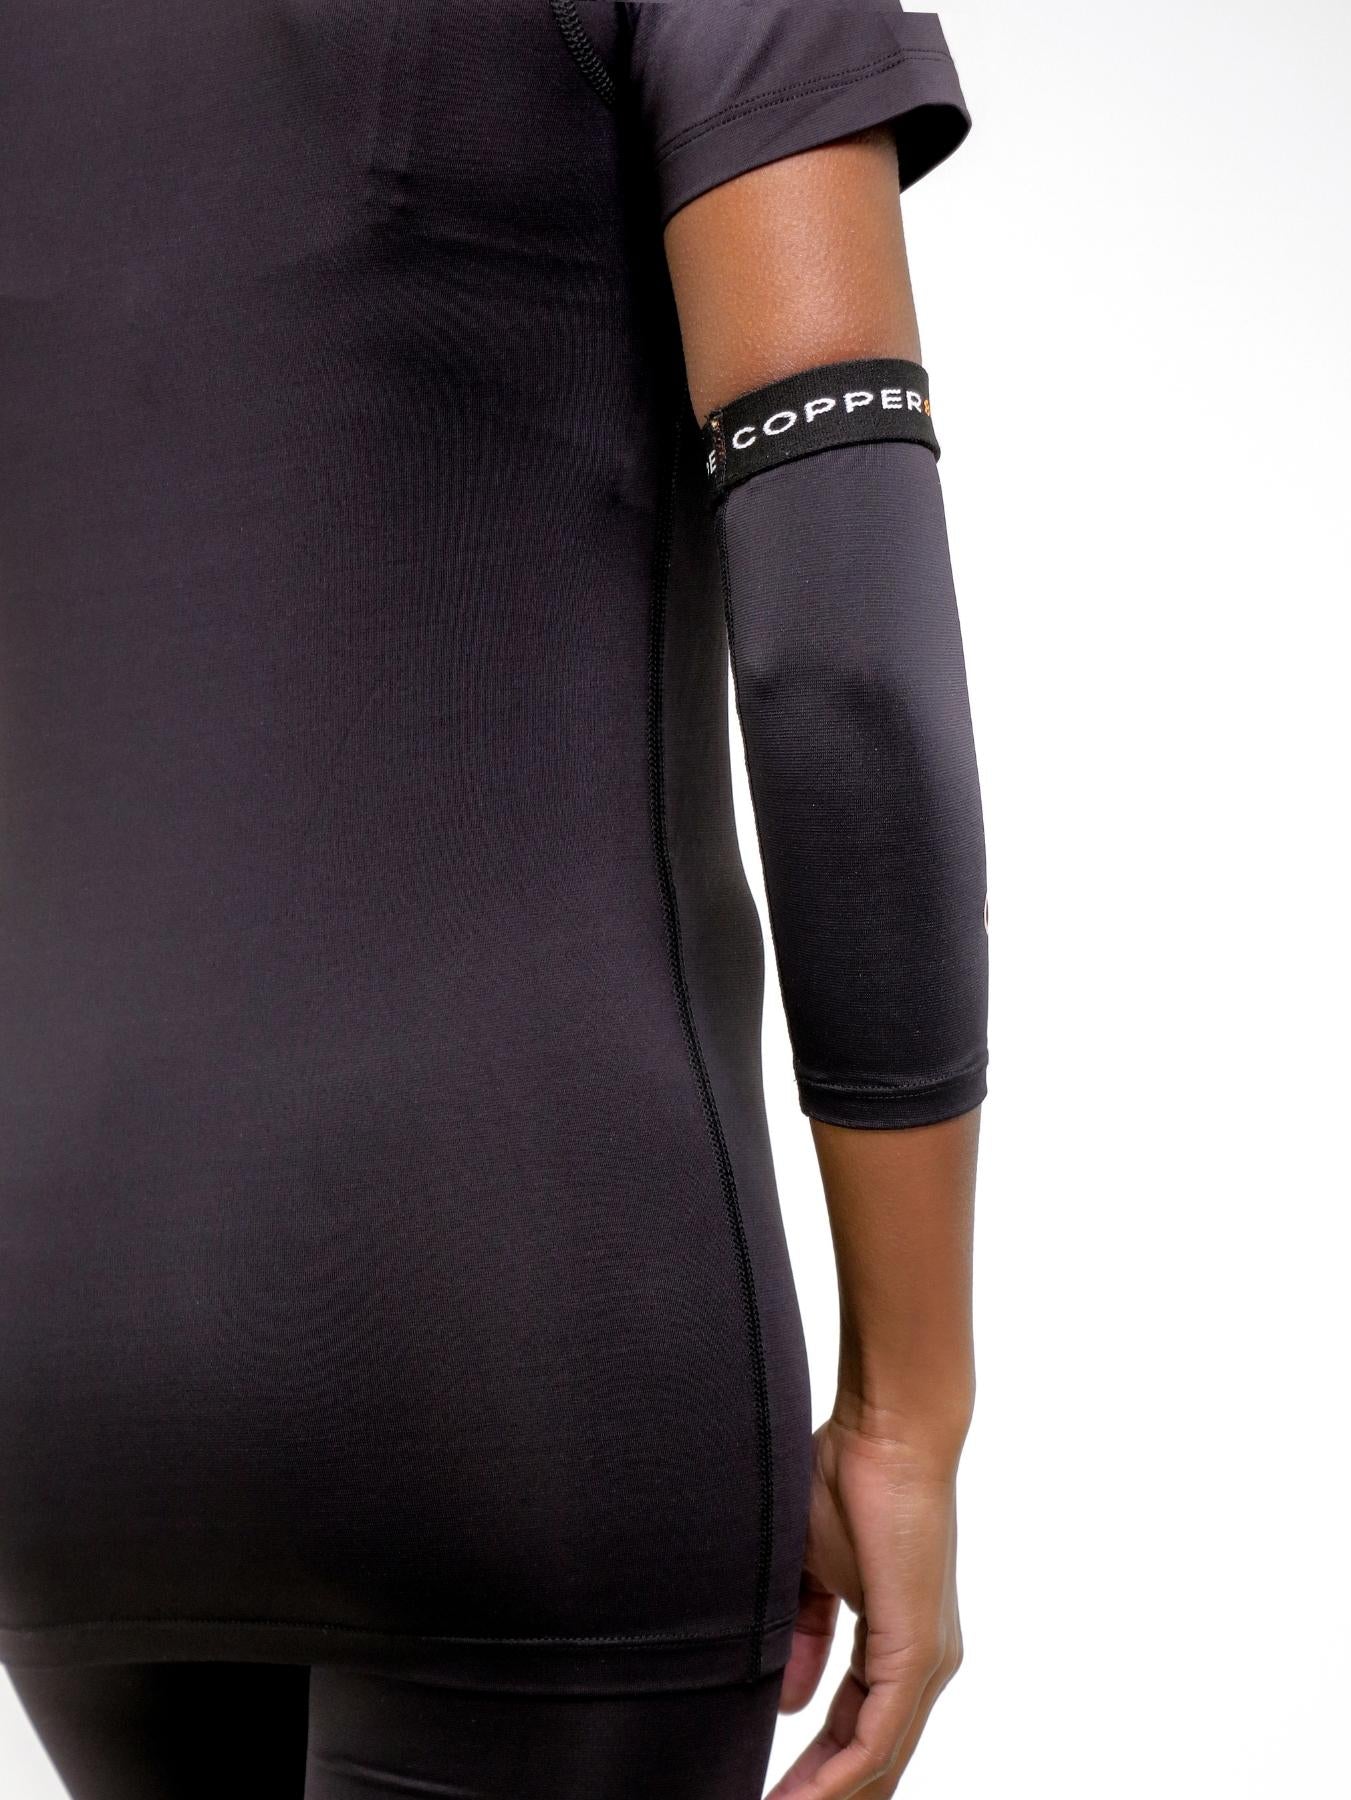 Copper Compression Elbow Sleeve - Unisex